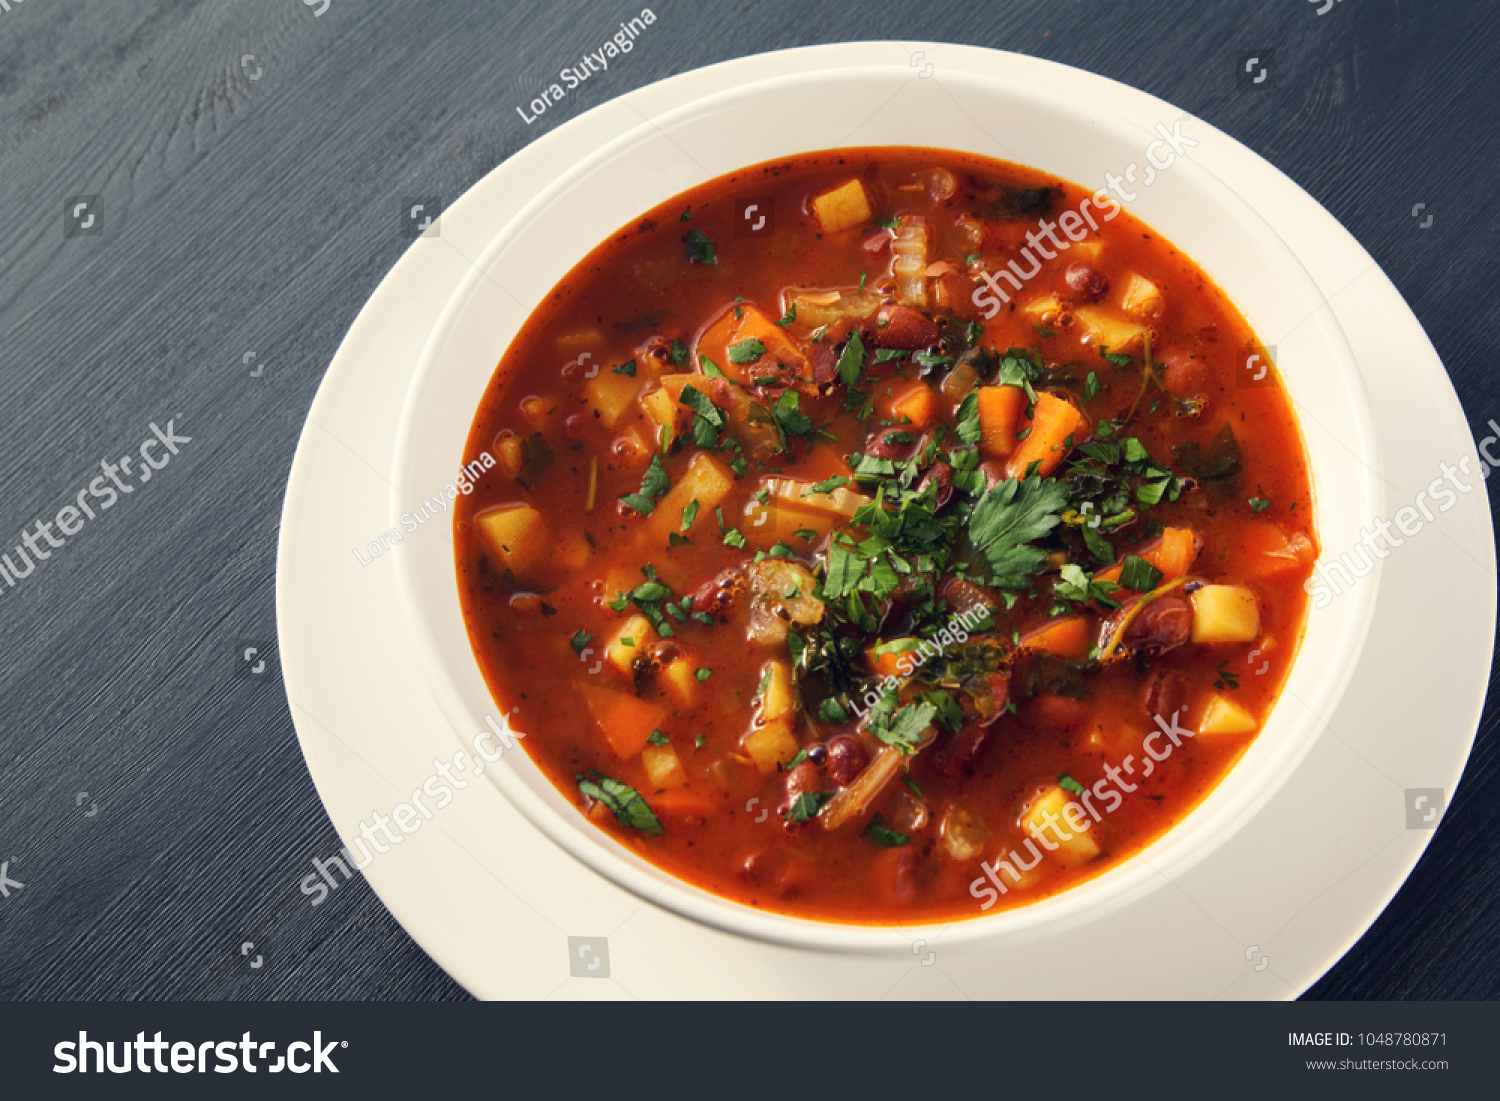 Tomato soup with red beans, potato and carrot. Vegan diet. European cuisine. Vegetarian dish. Main course. Organic meal. #1048780871